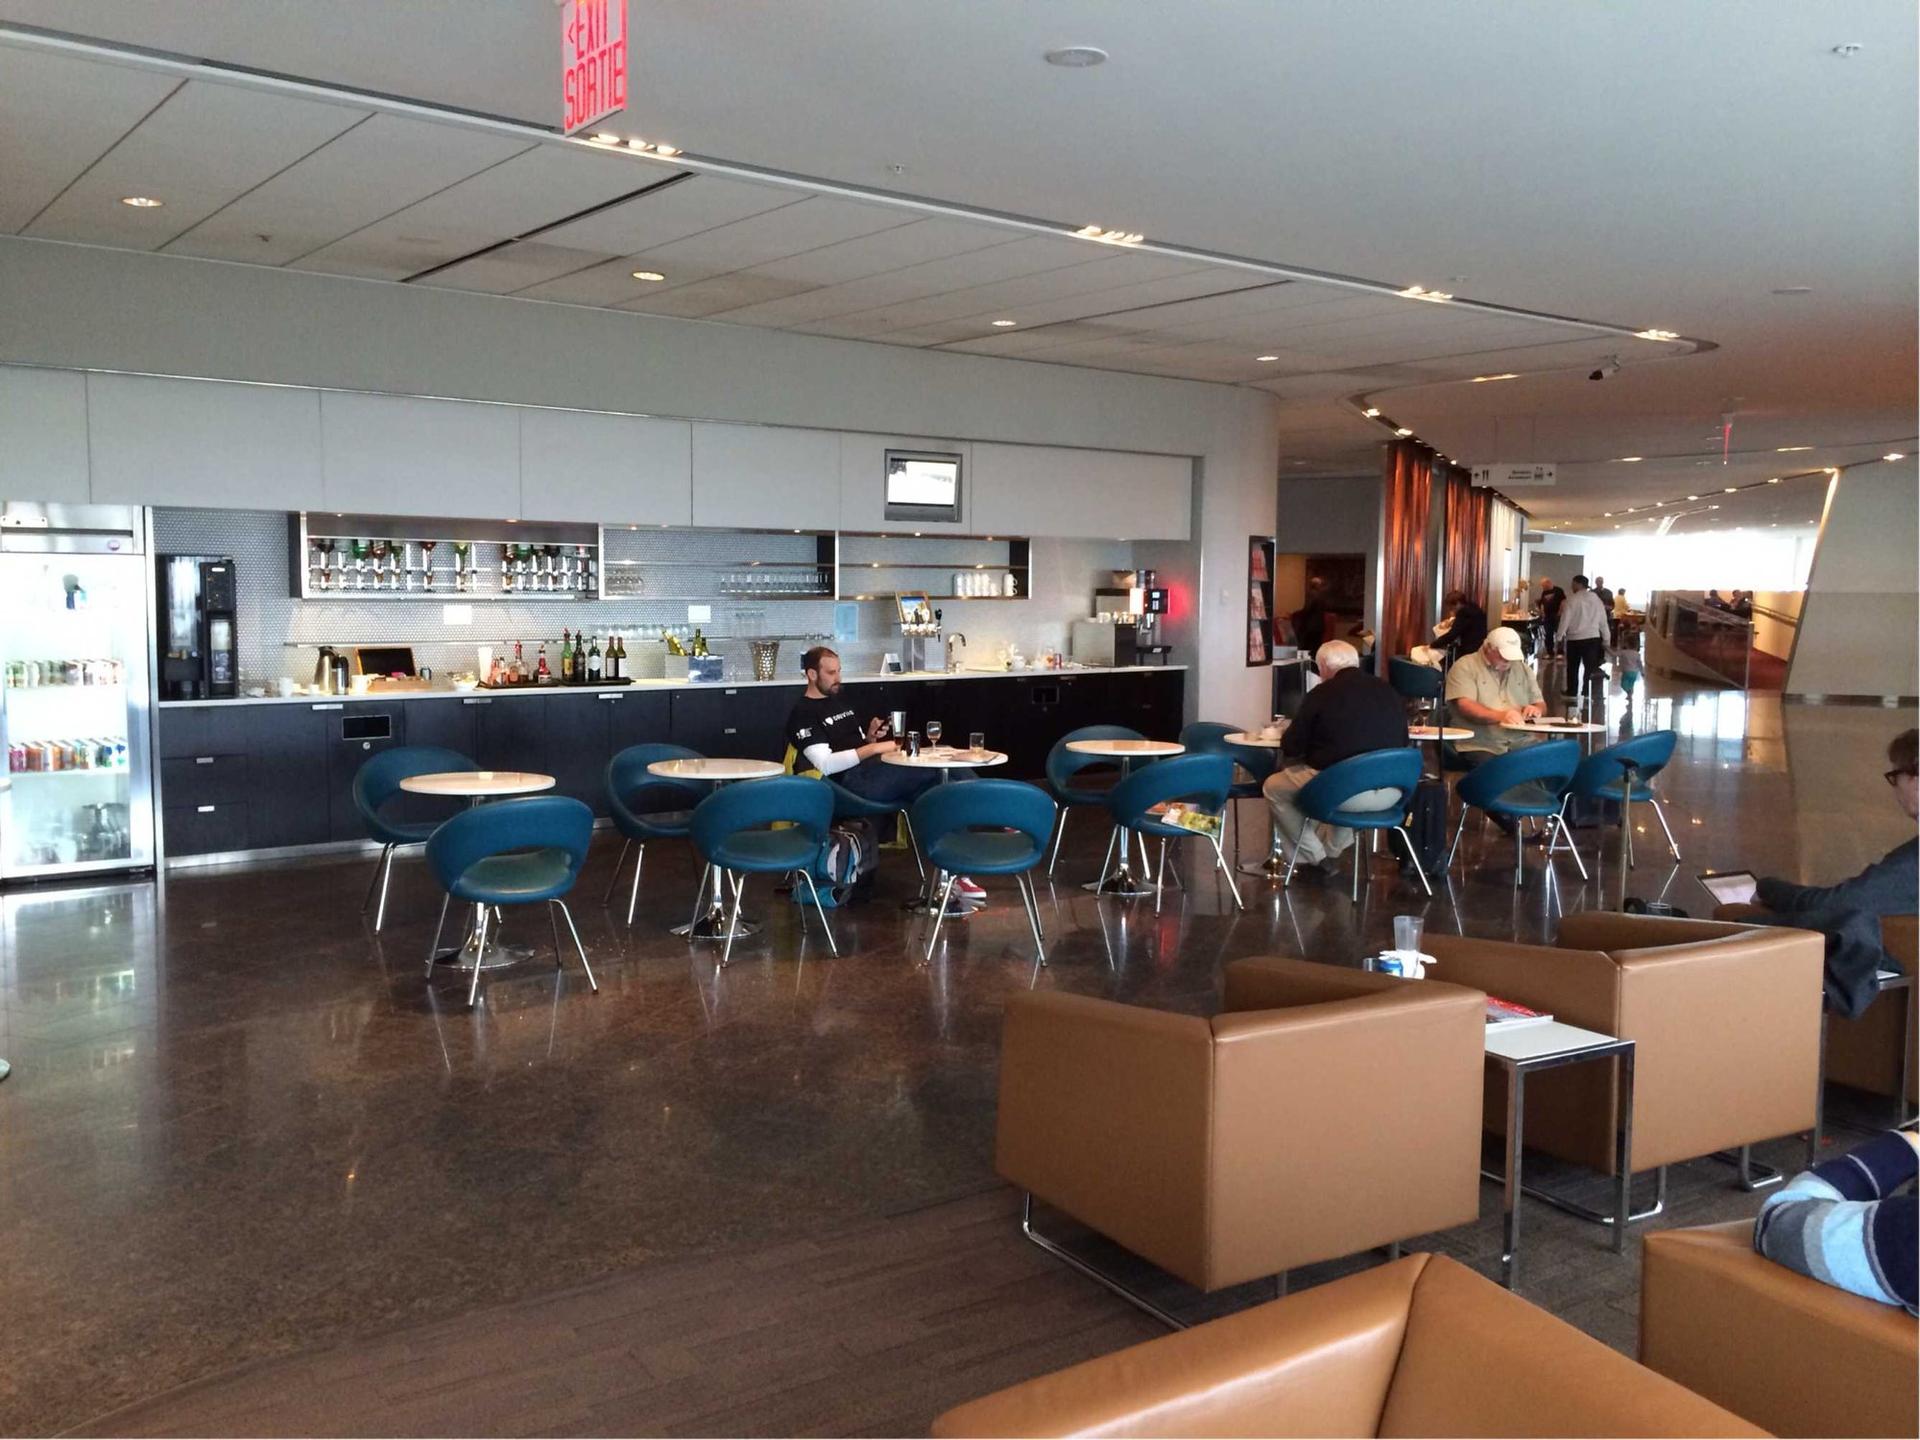 Air Canada Maple Leaf Lounge image 12 of 30